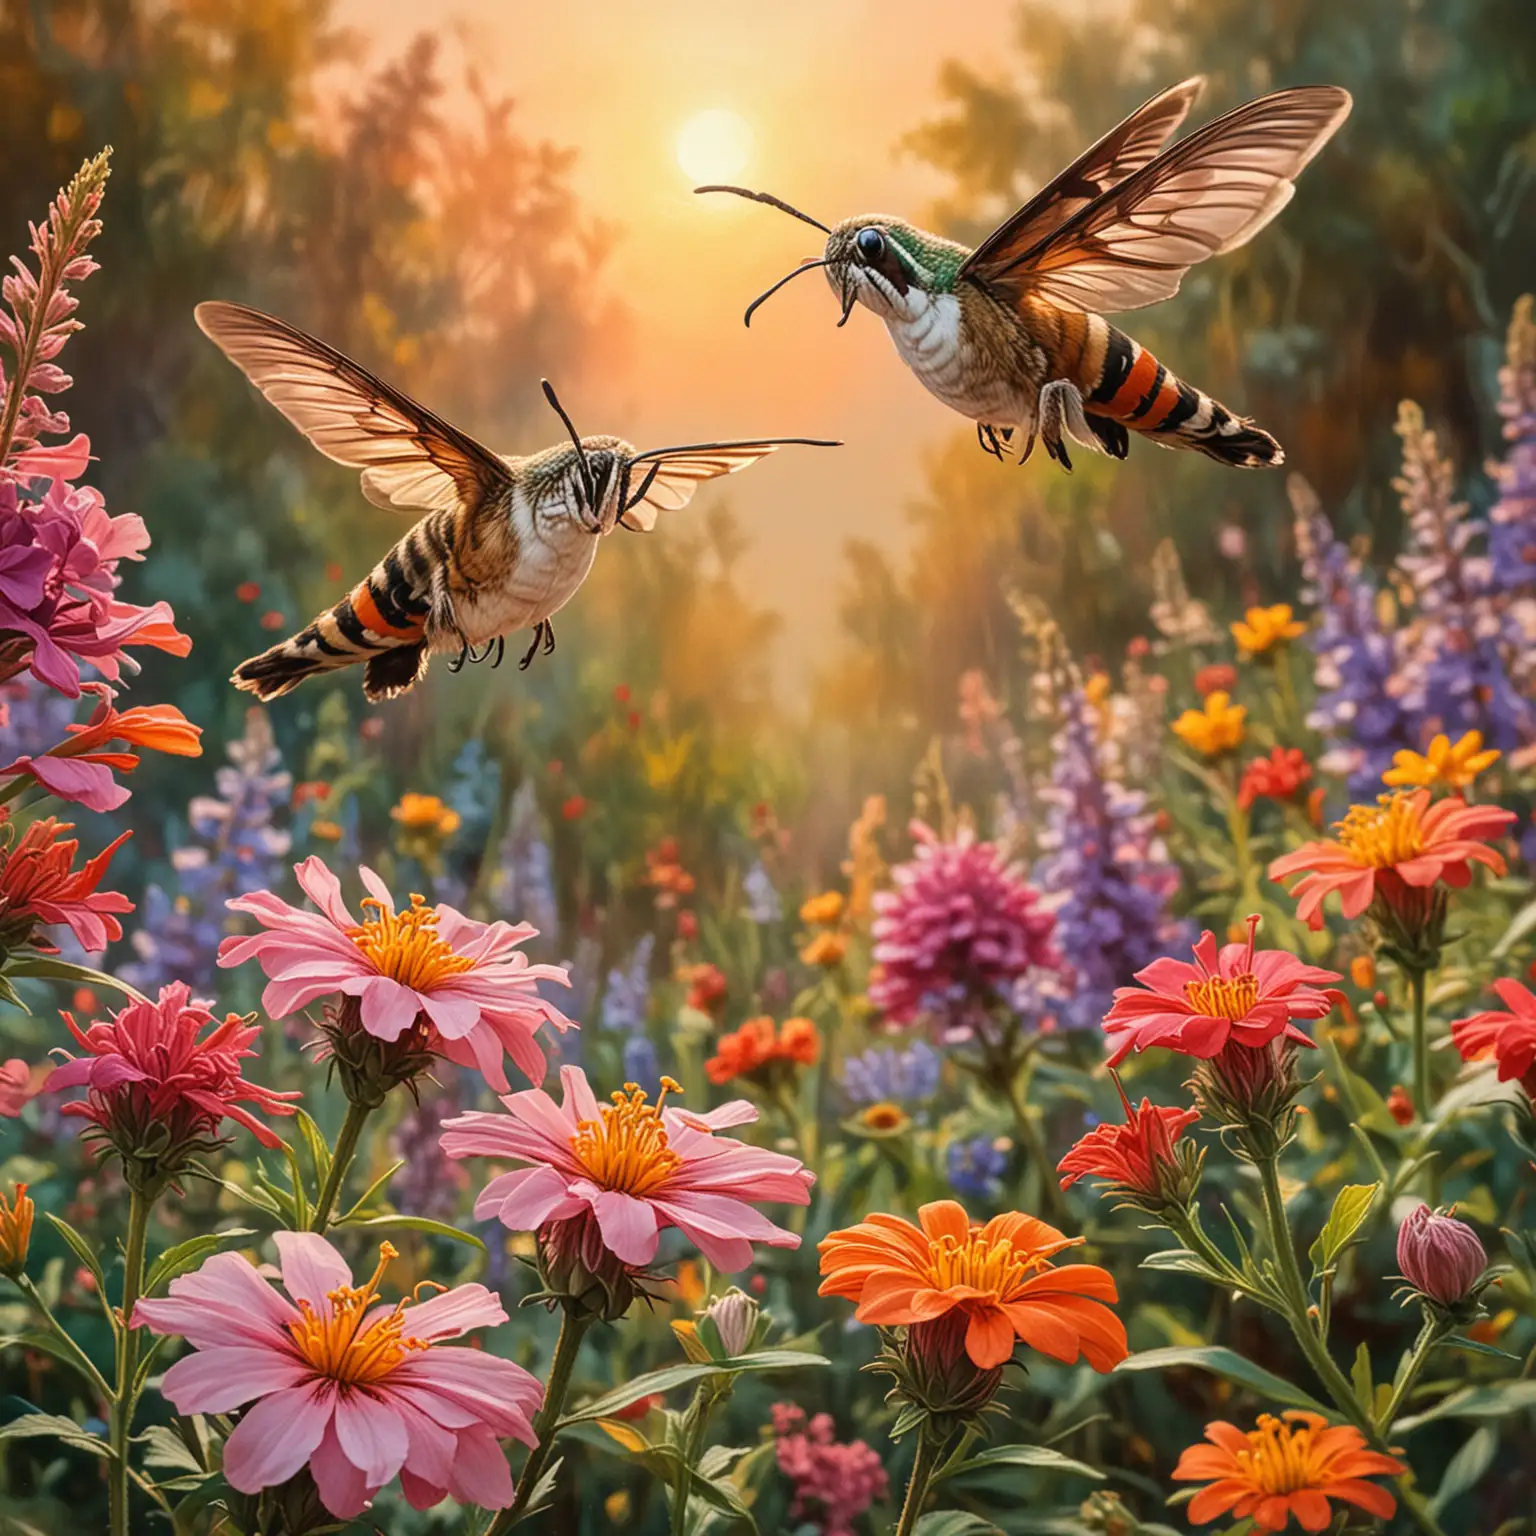 hummingbird moth flying near four o'clock flower in colorful garden at sunset. Impressionist oil painting style.